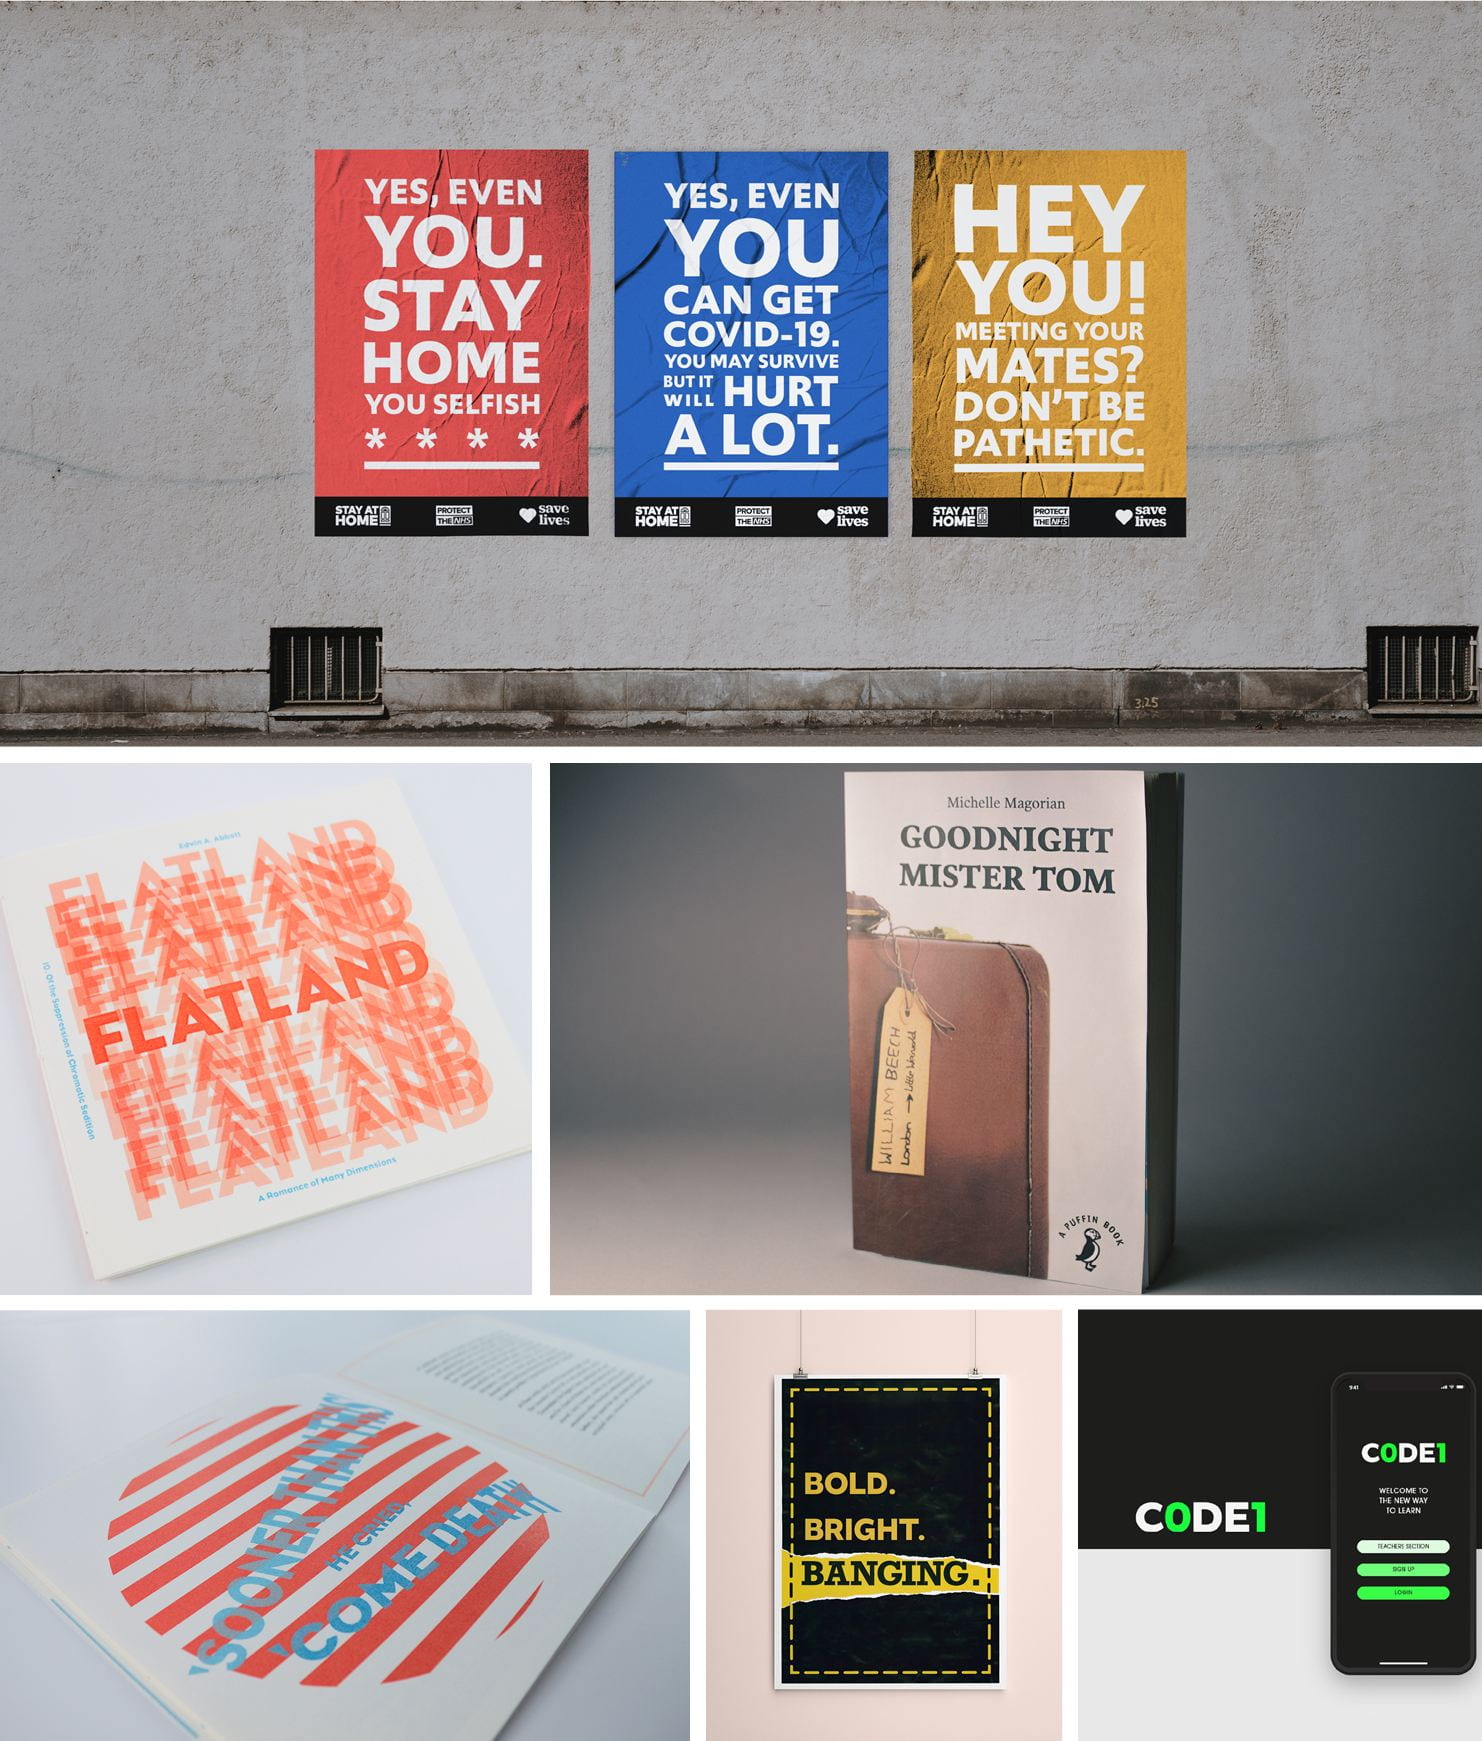 Various examples of typography including posters about COVID-19 displayed on a wall, a book 'Goodnight Mister Tom', an advertisement on a phone and a book called 'Flatland'.